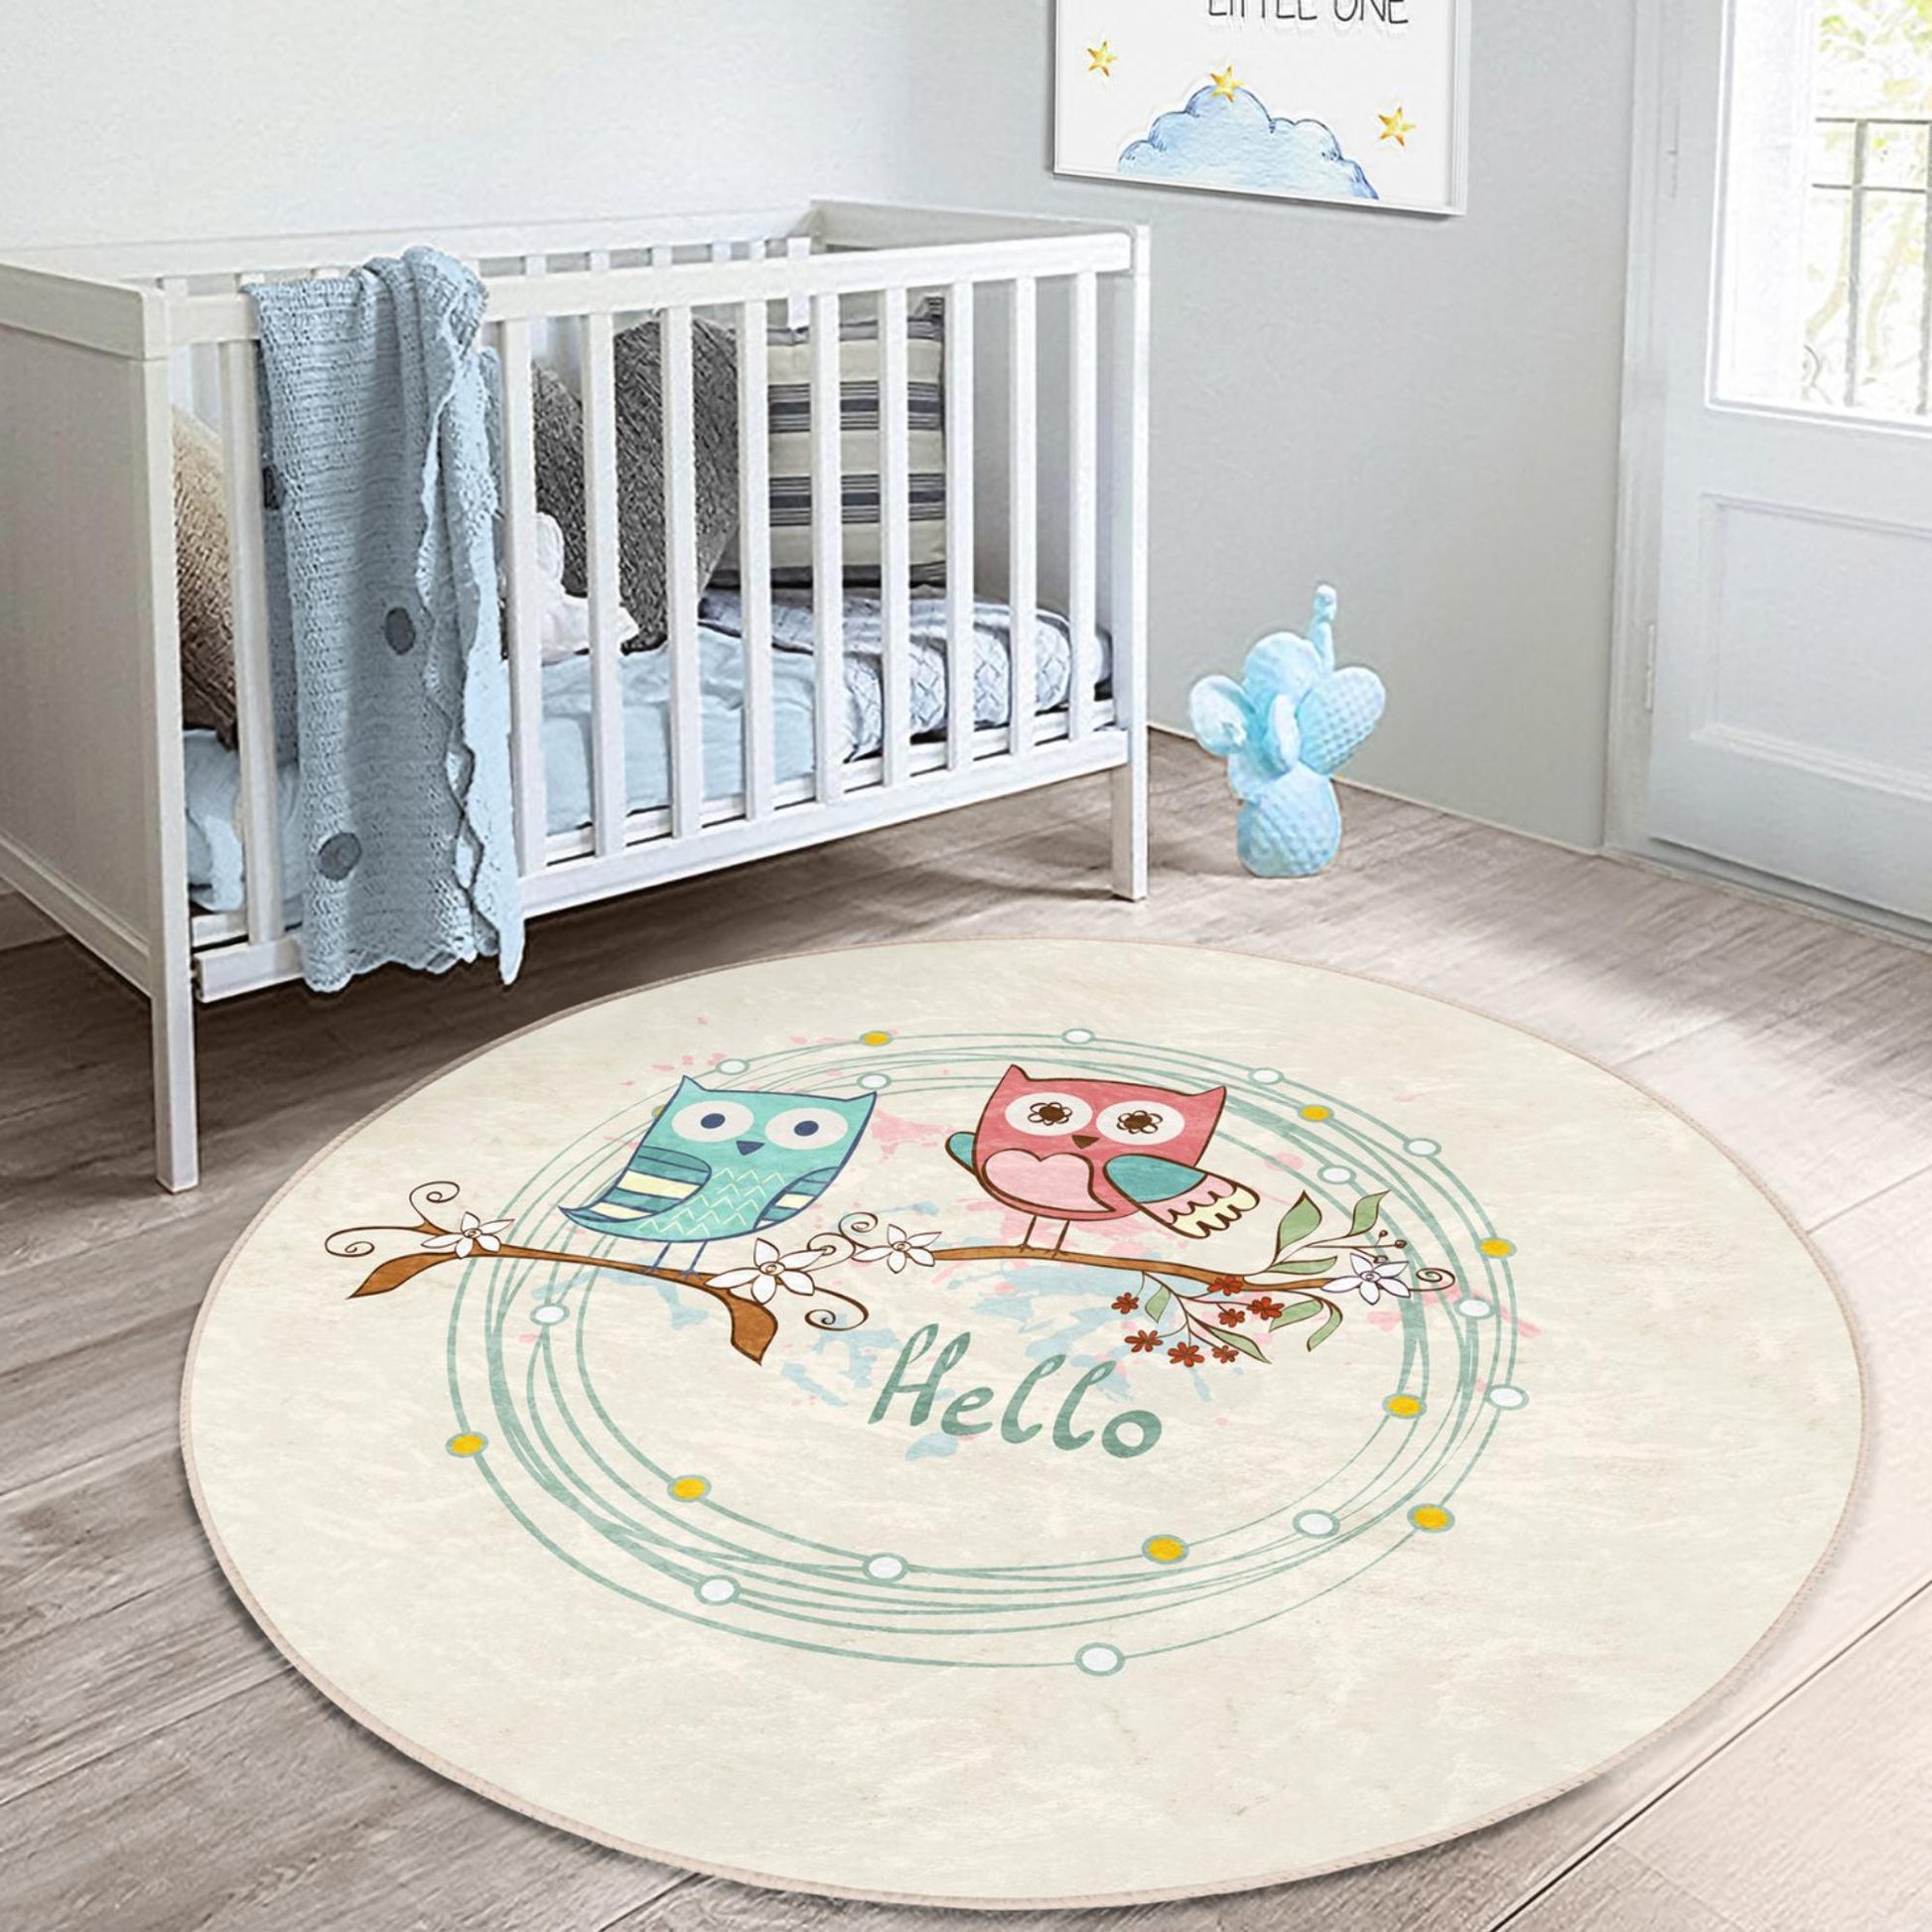 Vibrant rug with charming owls on the tree prints for a whimsical atmosphere.